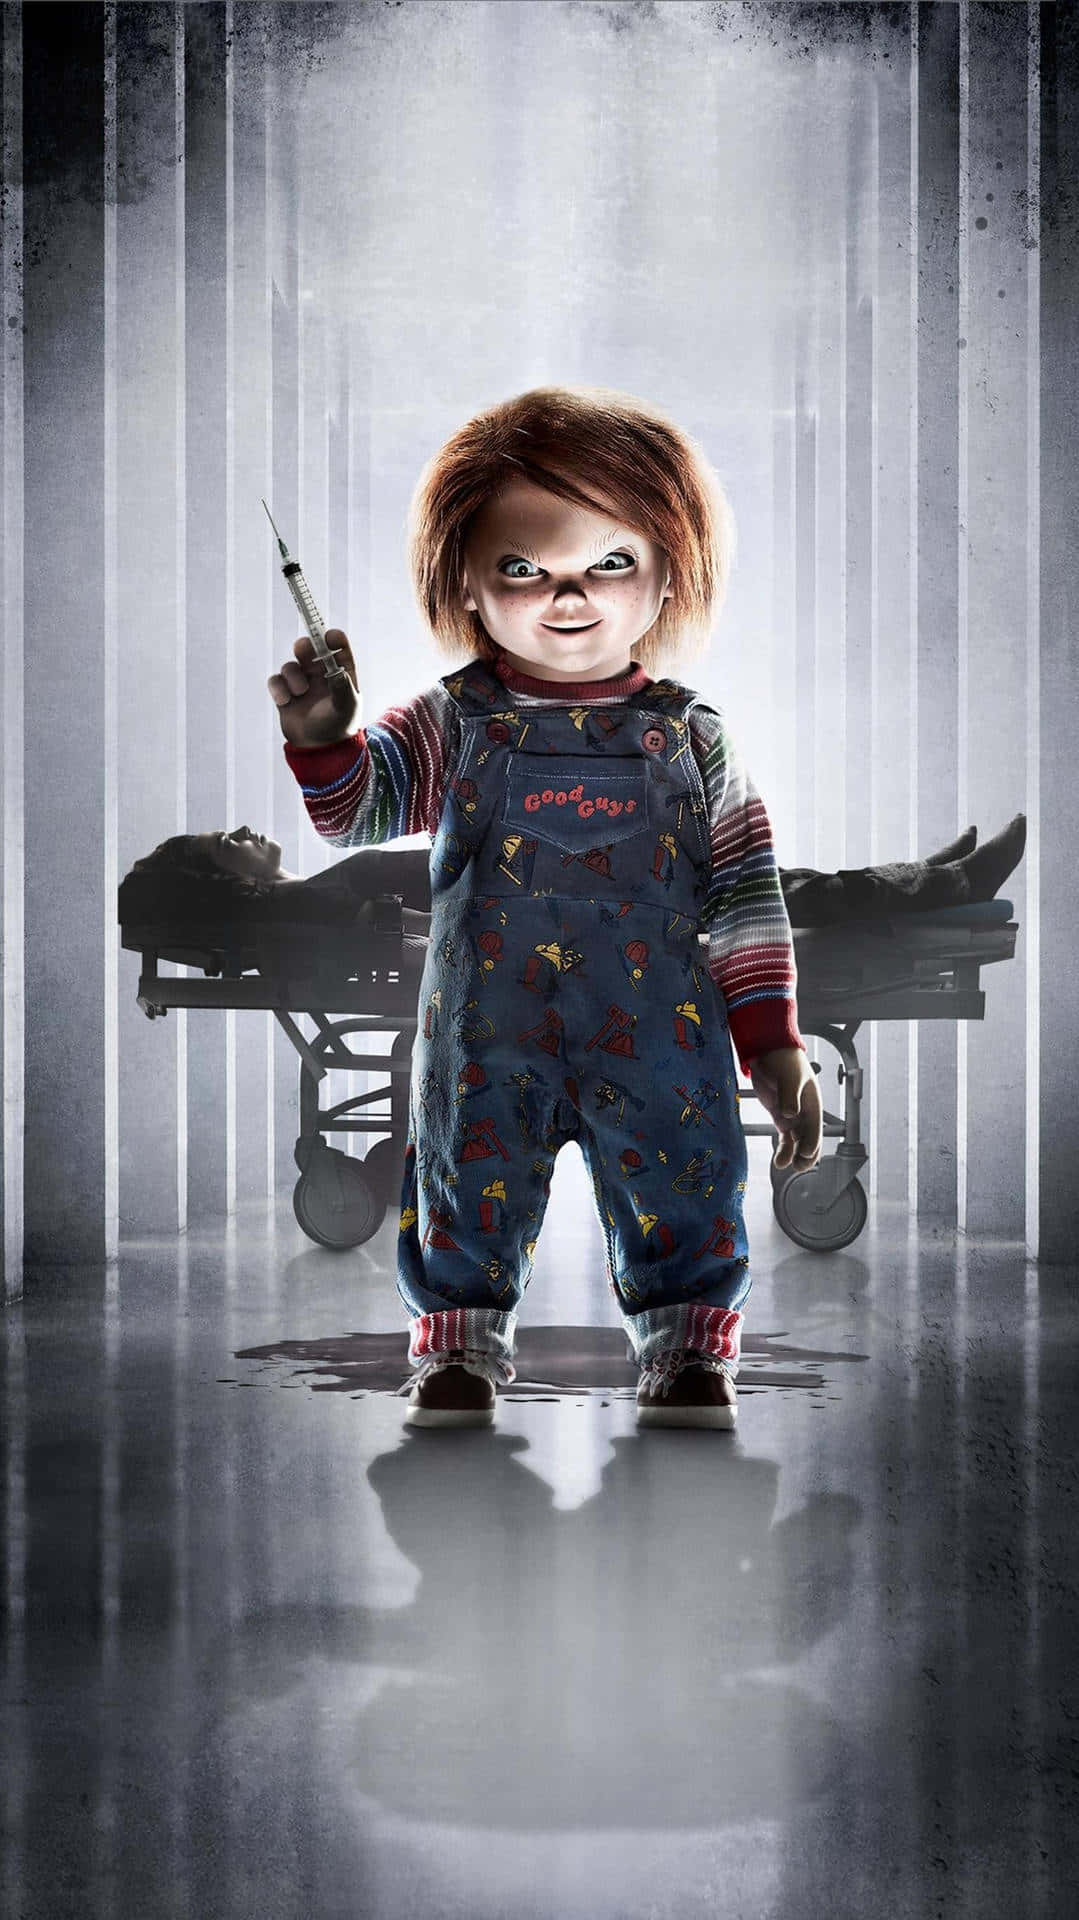 The Iconic Chucky Doll From the Horror Film Franchise